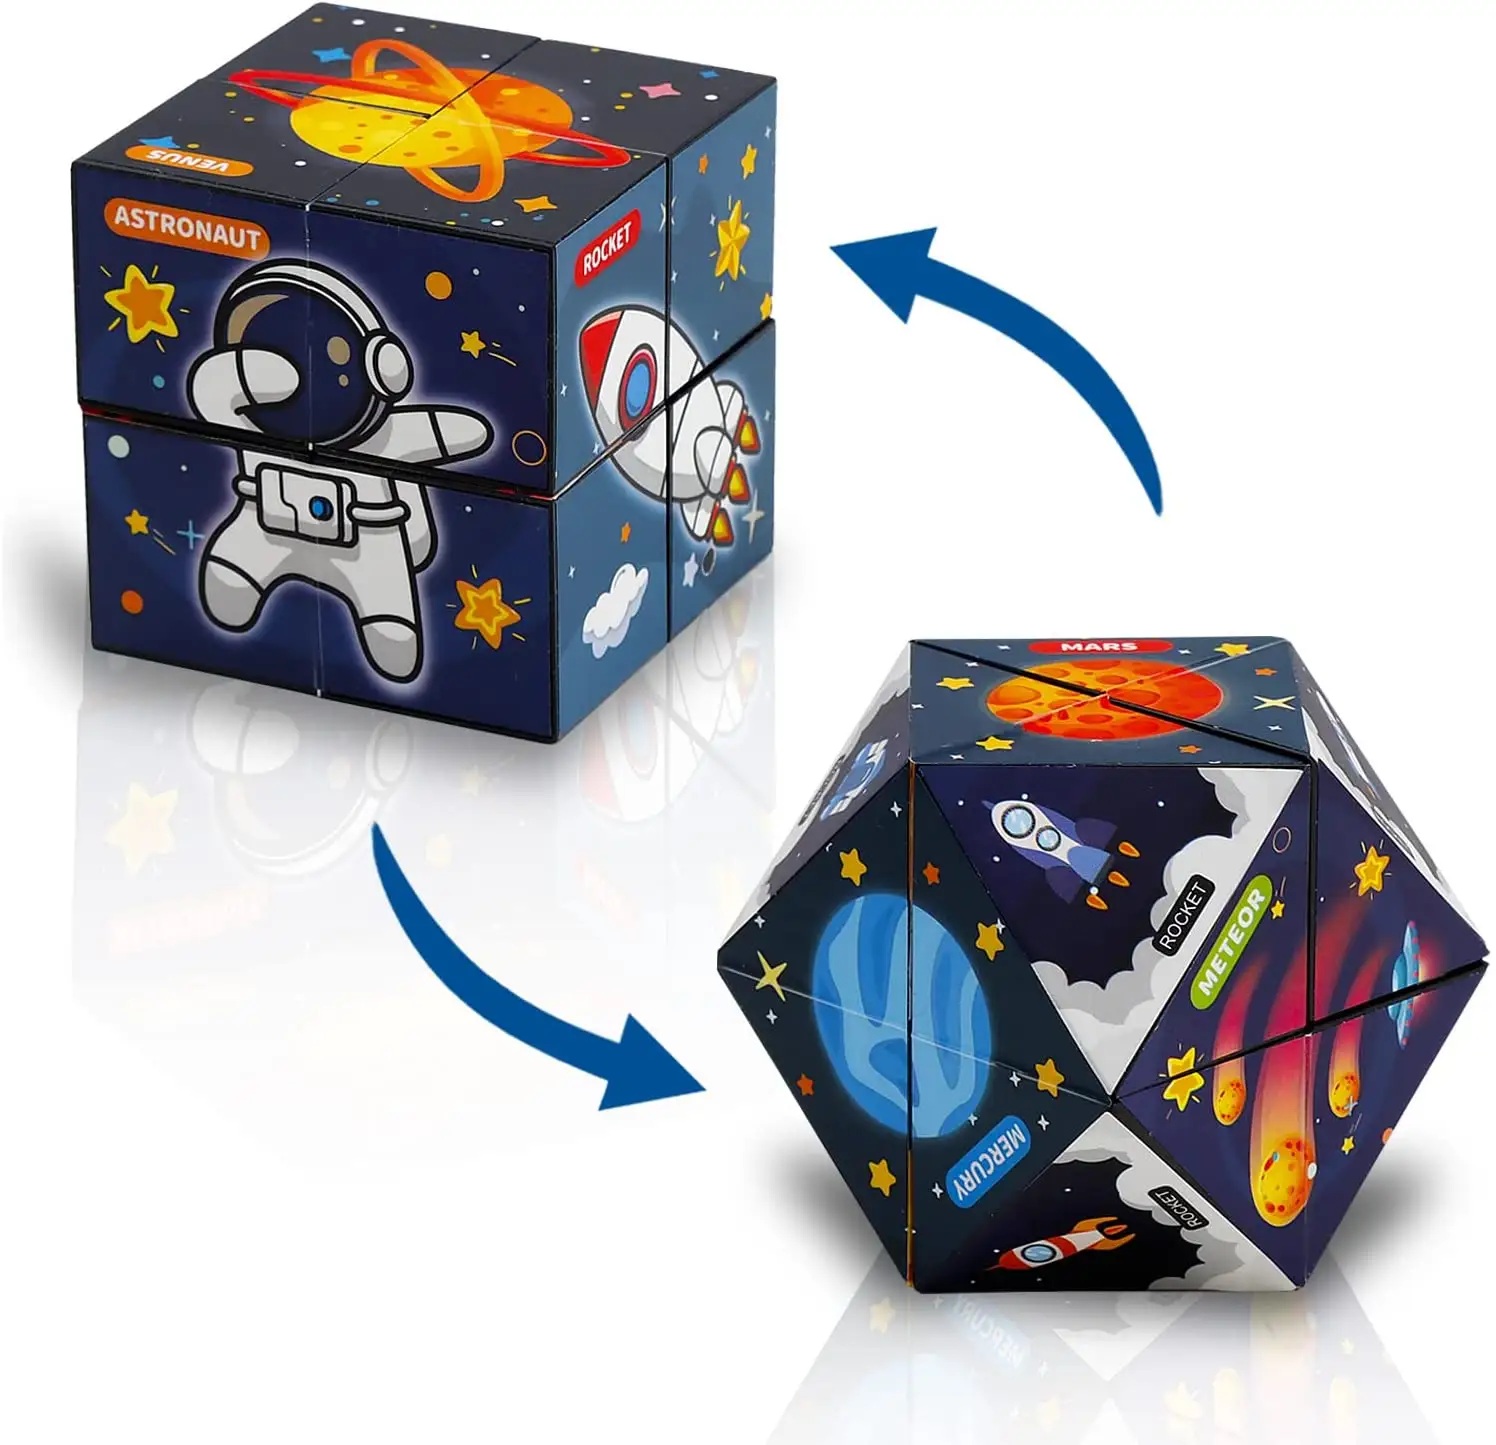 Magic Cube Fidget Toy, Star Cube Fidget Cube with 8 Build-in Magnets, Cool Mini Gadget for Stress Anxiety Relief and Kill Time